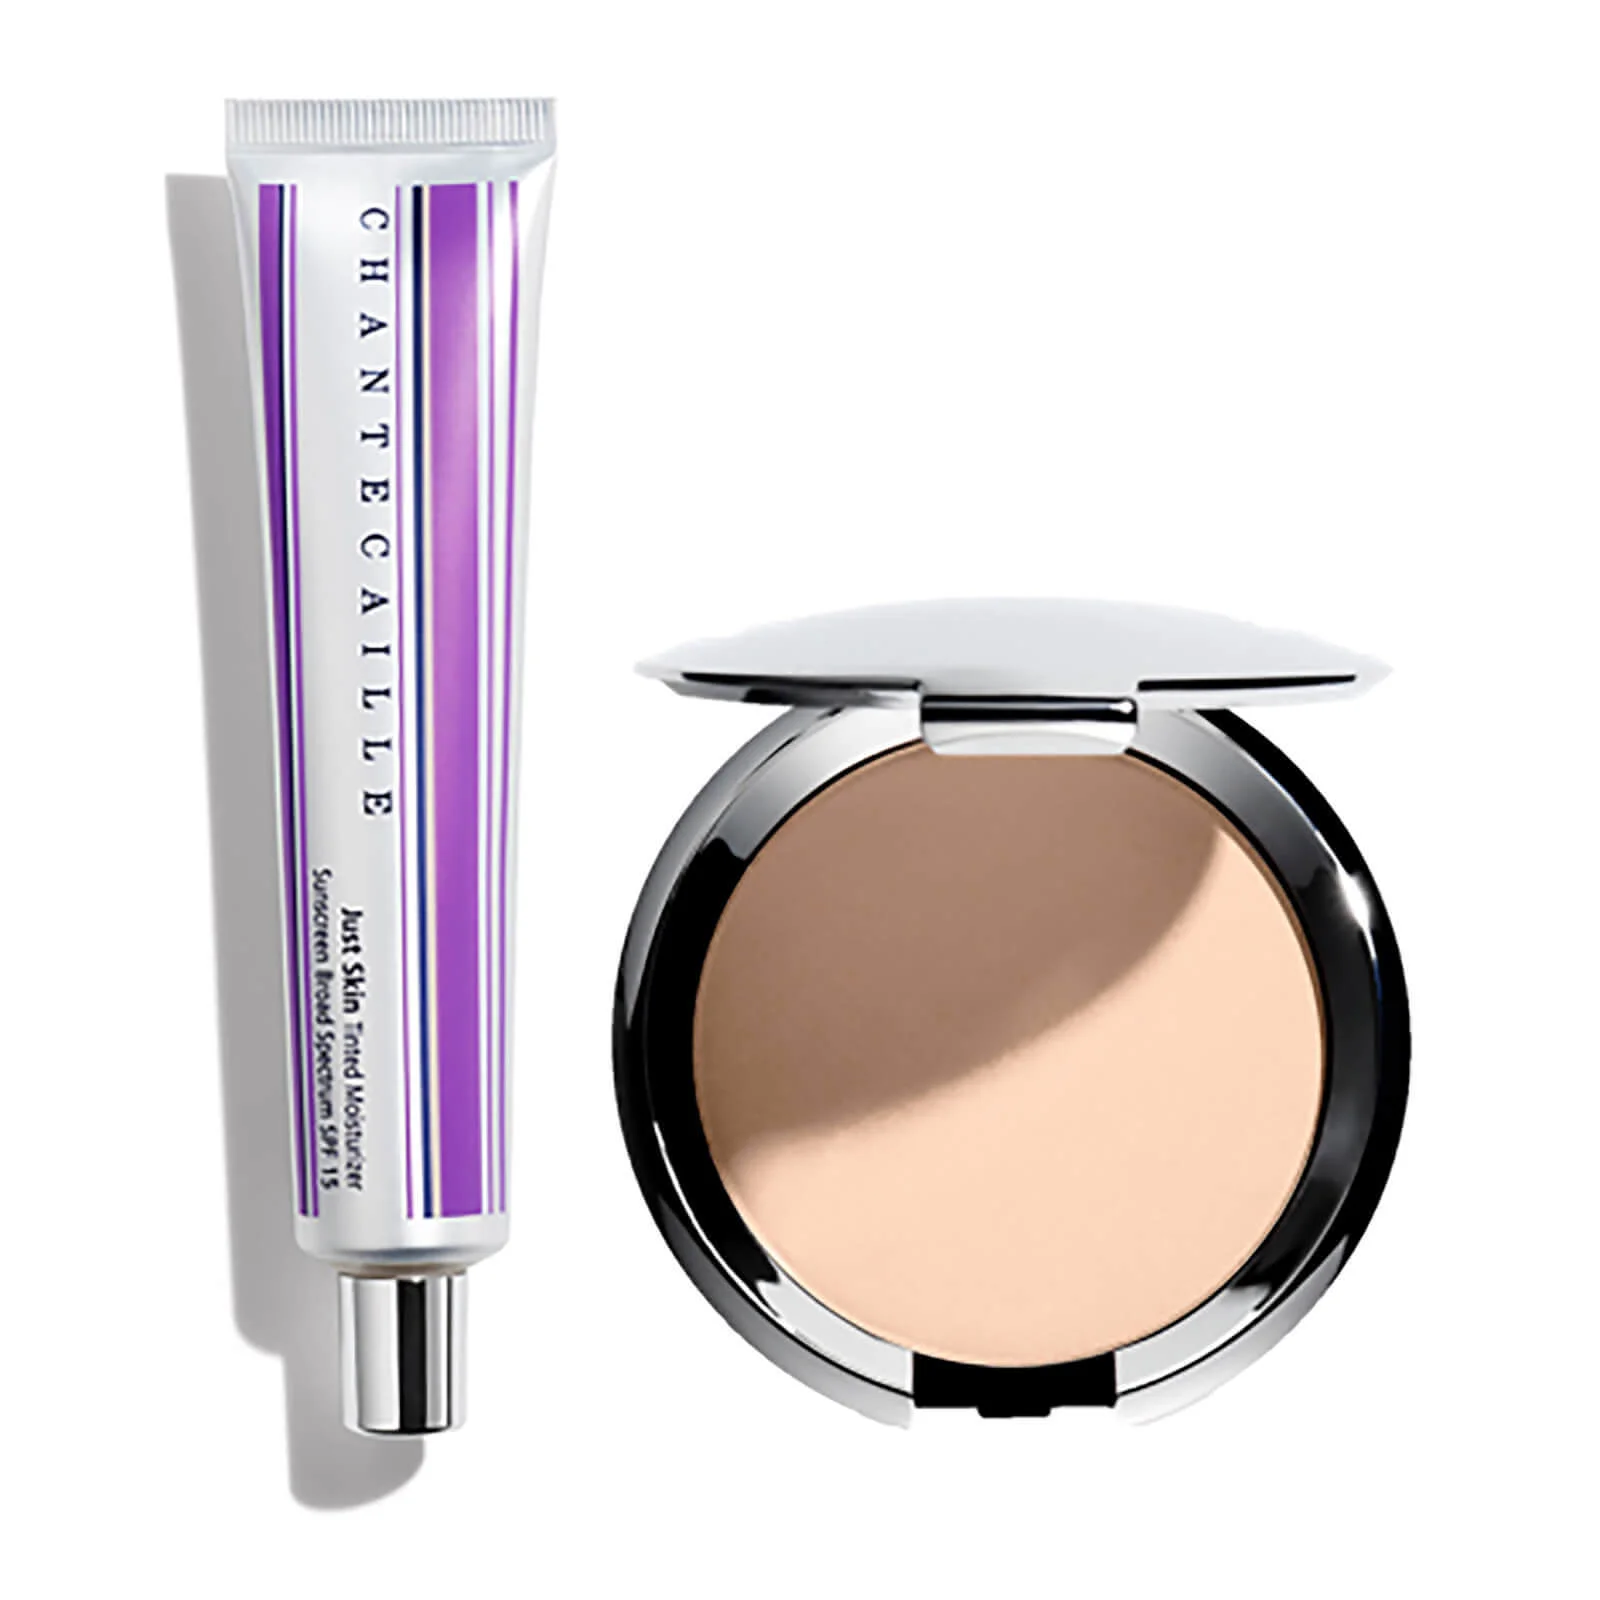 Chantecaille Exclusive Bliss Just Skin Perfecting Duo - Fair Image 1